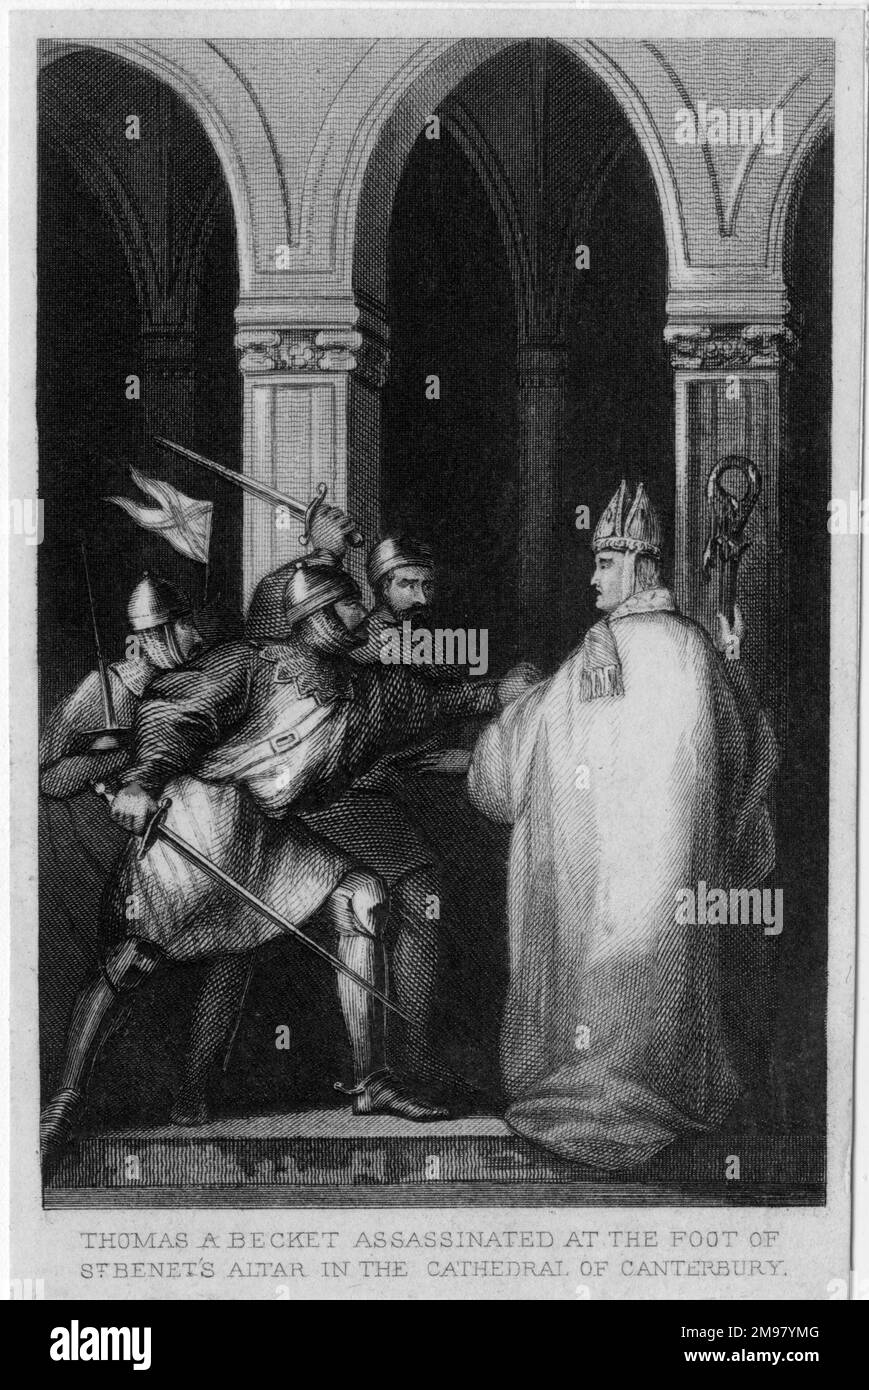 Thomas A Becket, Archbishop of Canterbury, assassinated by four knights at the foot of St Benet's Altar, 29 December 1170. Stock Photo